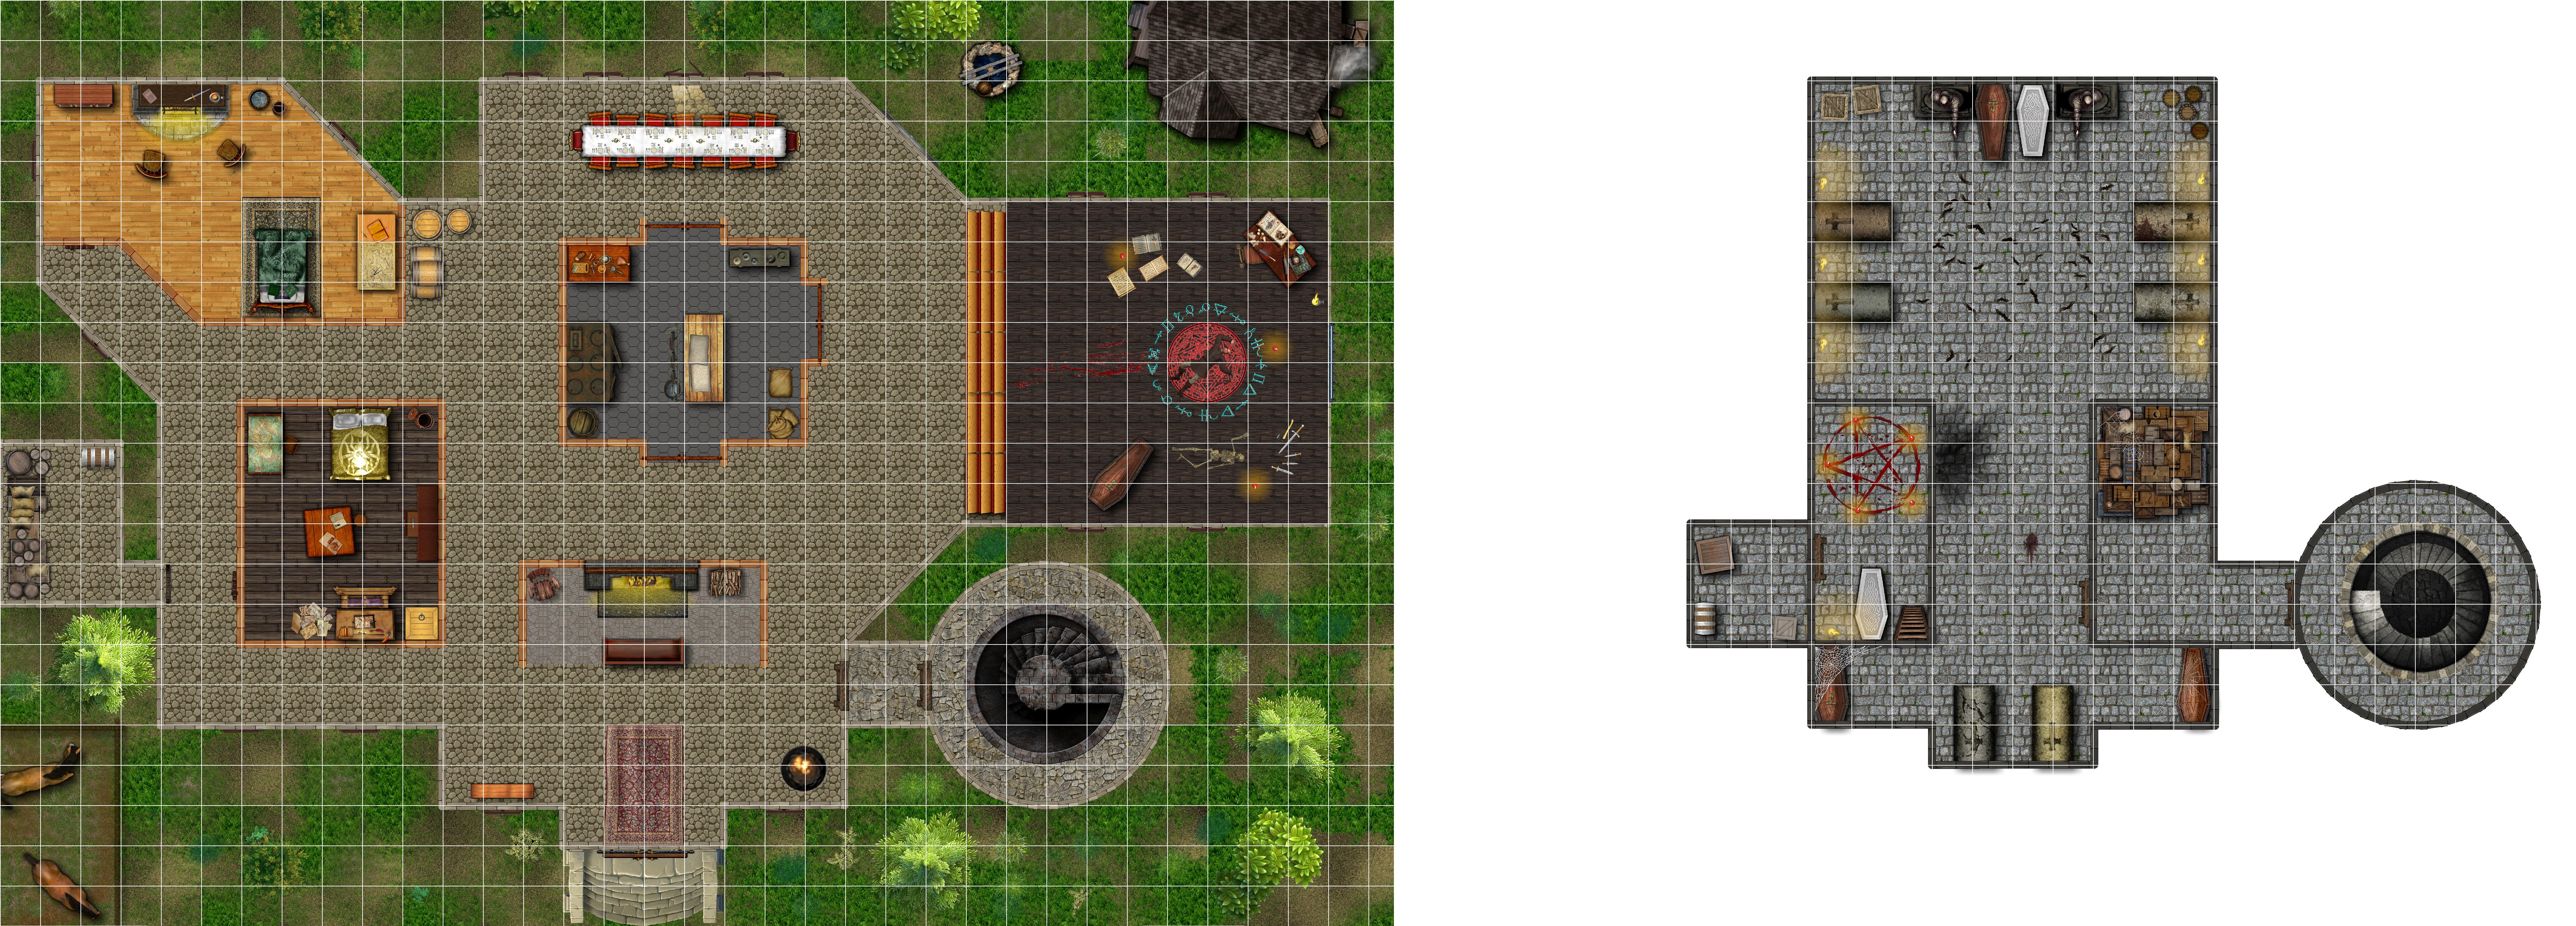 how to add assets to dungeon painter studio